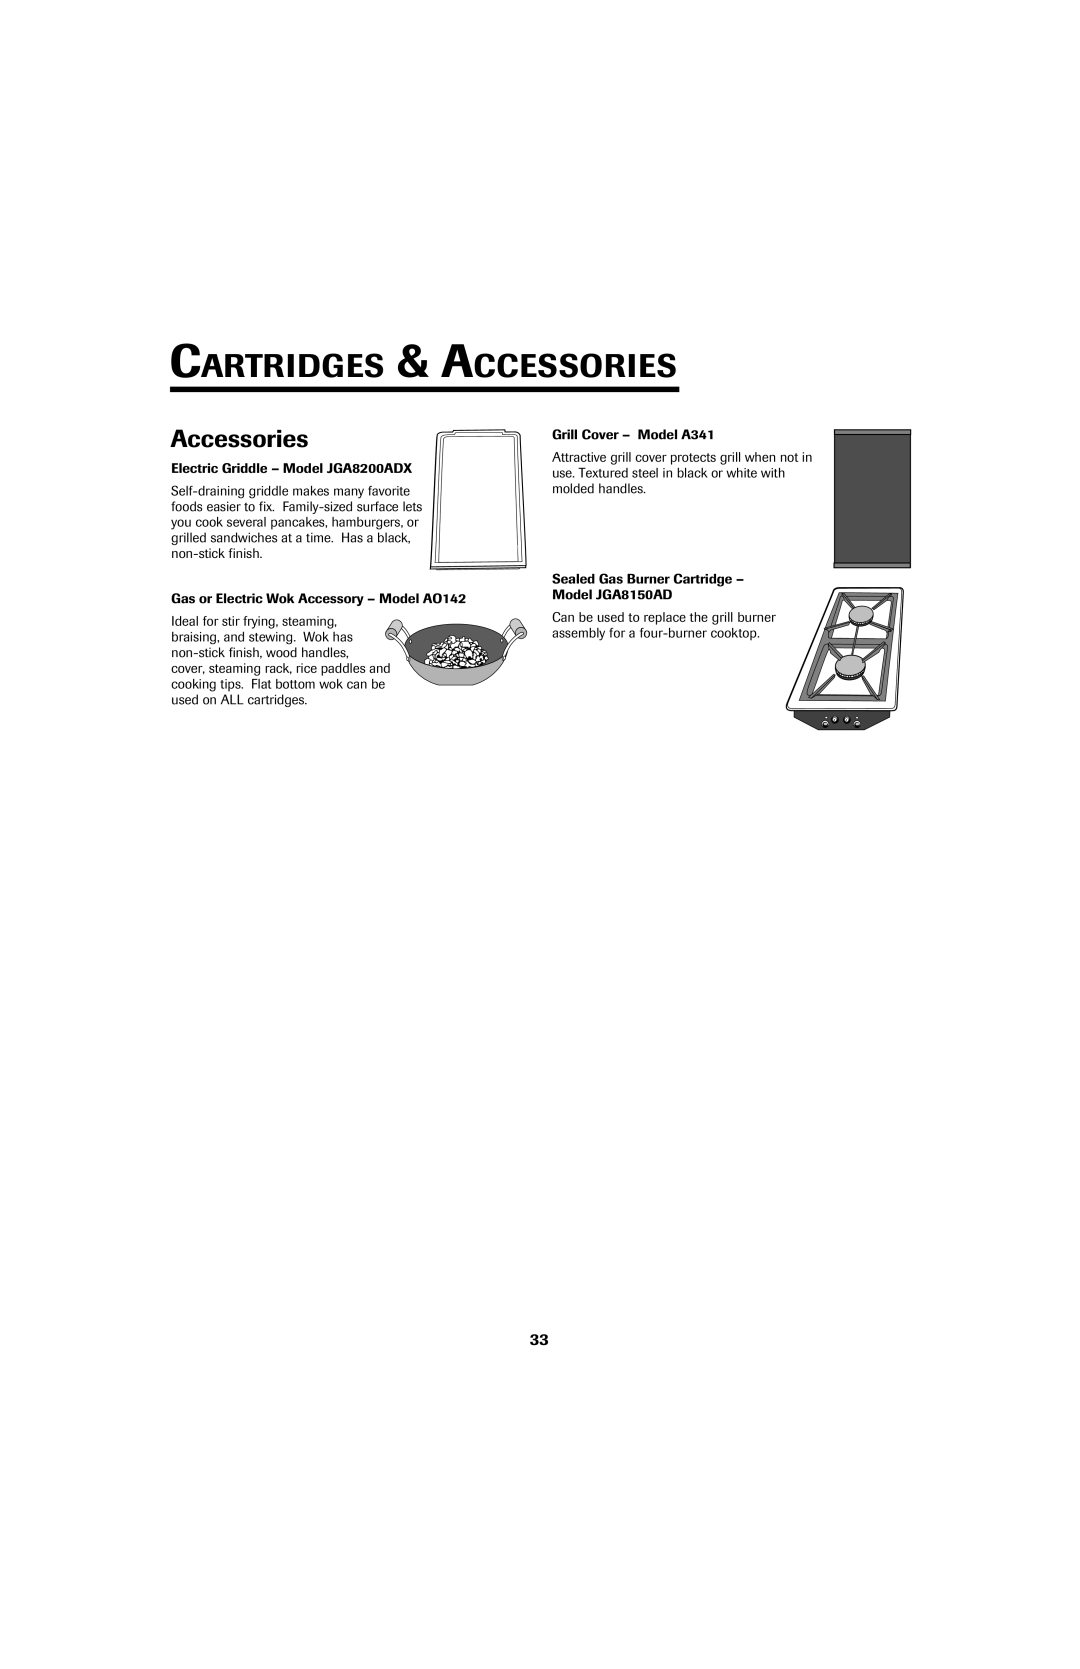 Jenn-Air 8113P753-60 important safety instructions Cartridges & Accessories 